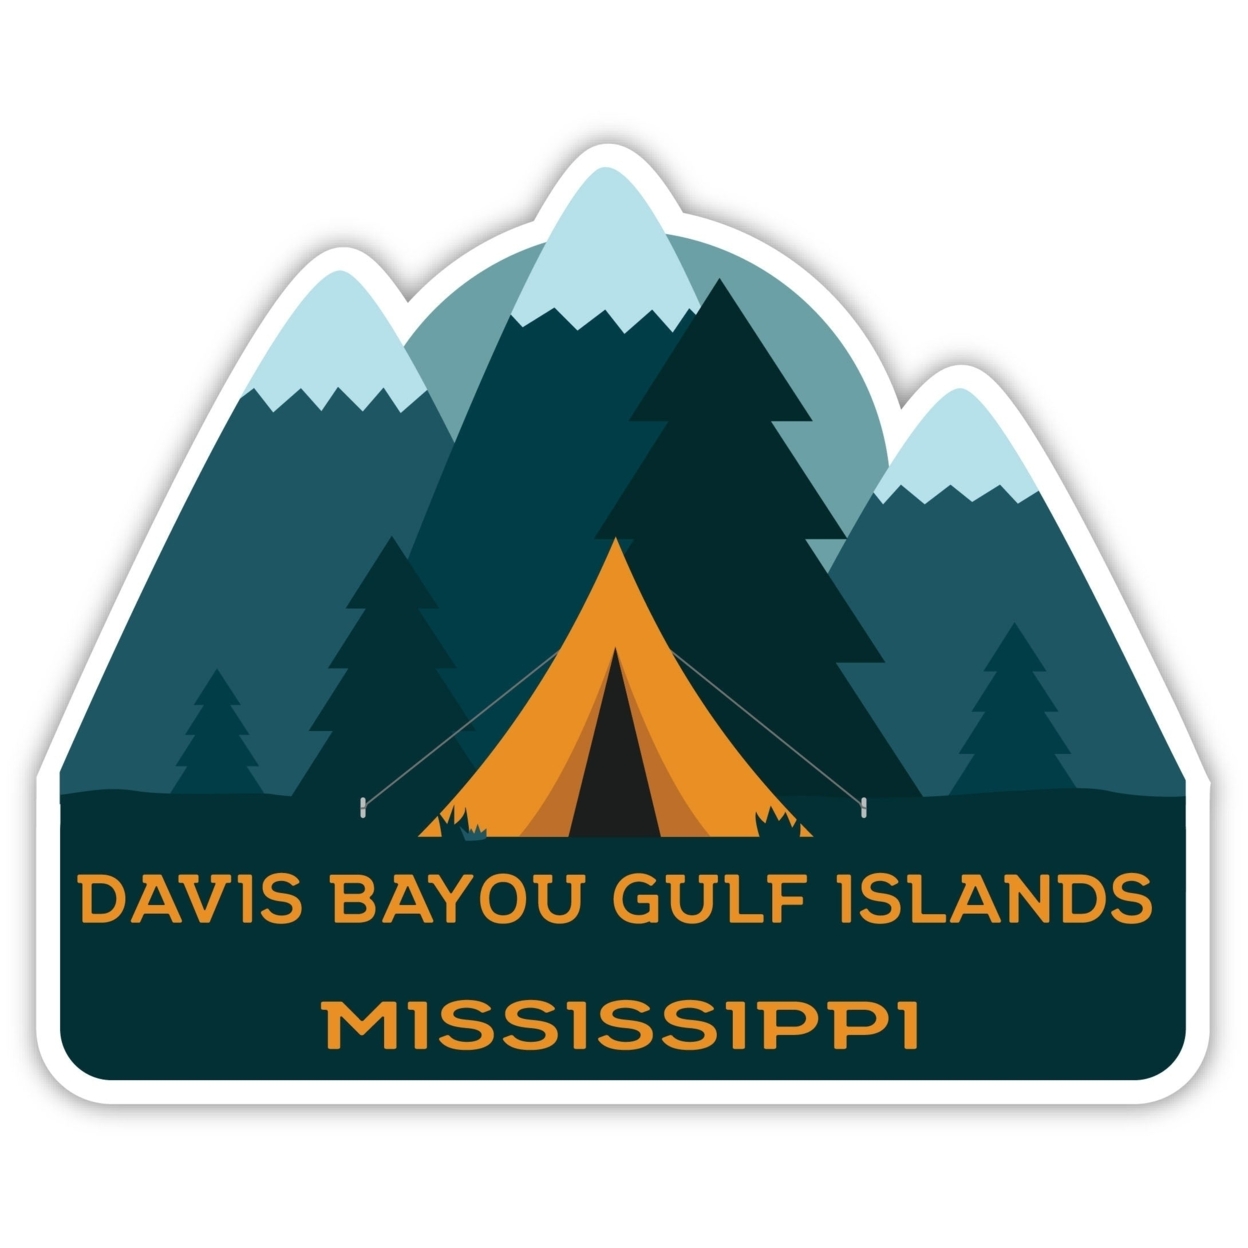 Davis Bayou Gulf Islands Mississippi Souvenir Decorative Stickers (Choose Theme And Size) - 4-Pack, 12-Inch, Tent